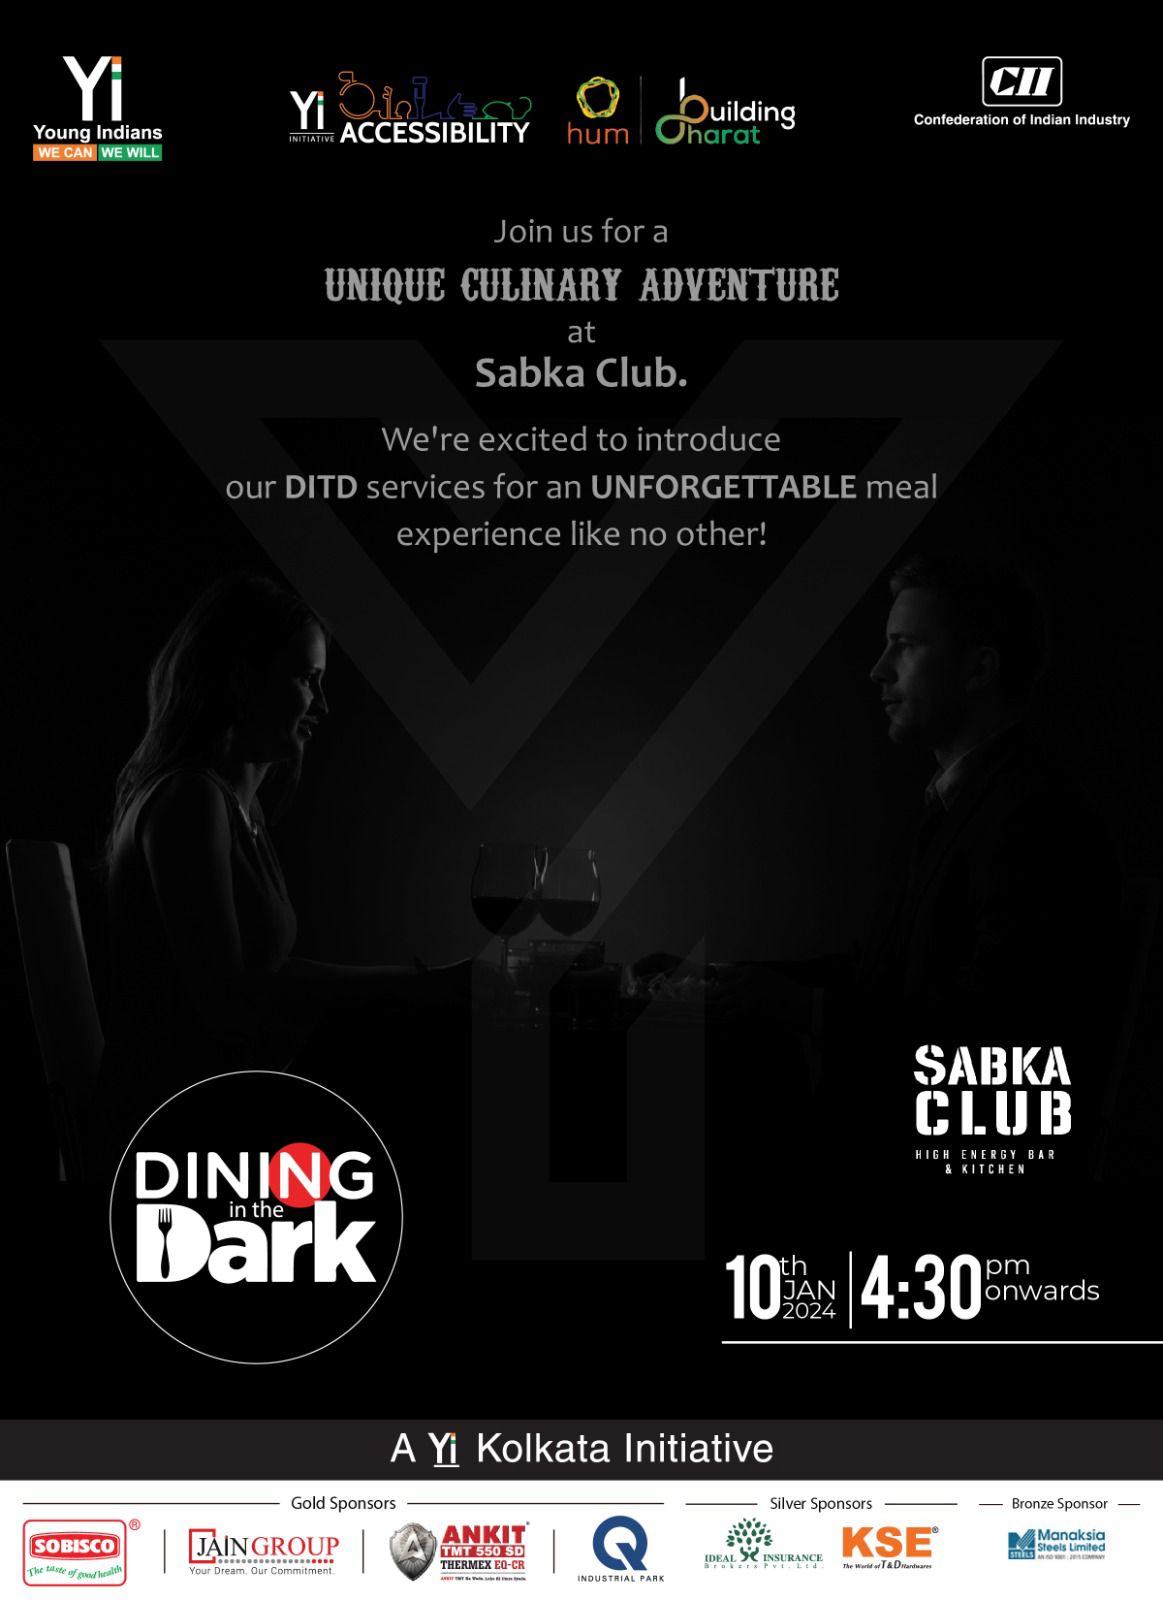 Yi24 | Accessibility - Dining In The Dark 